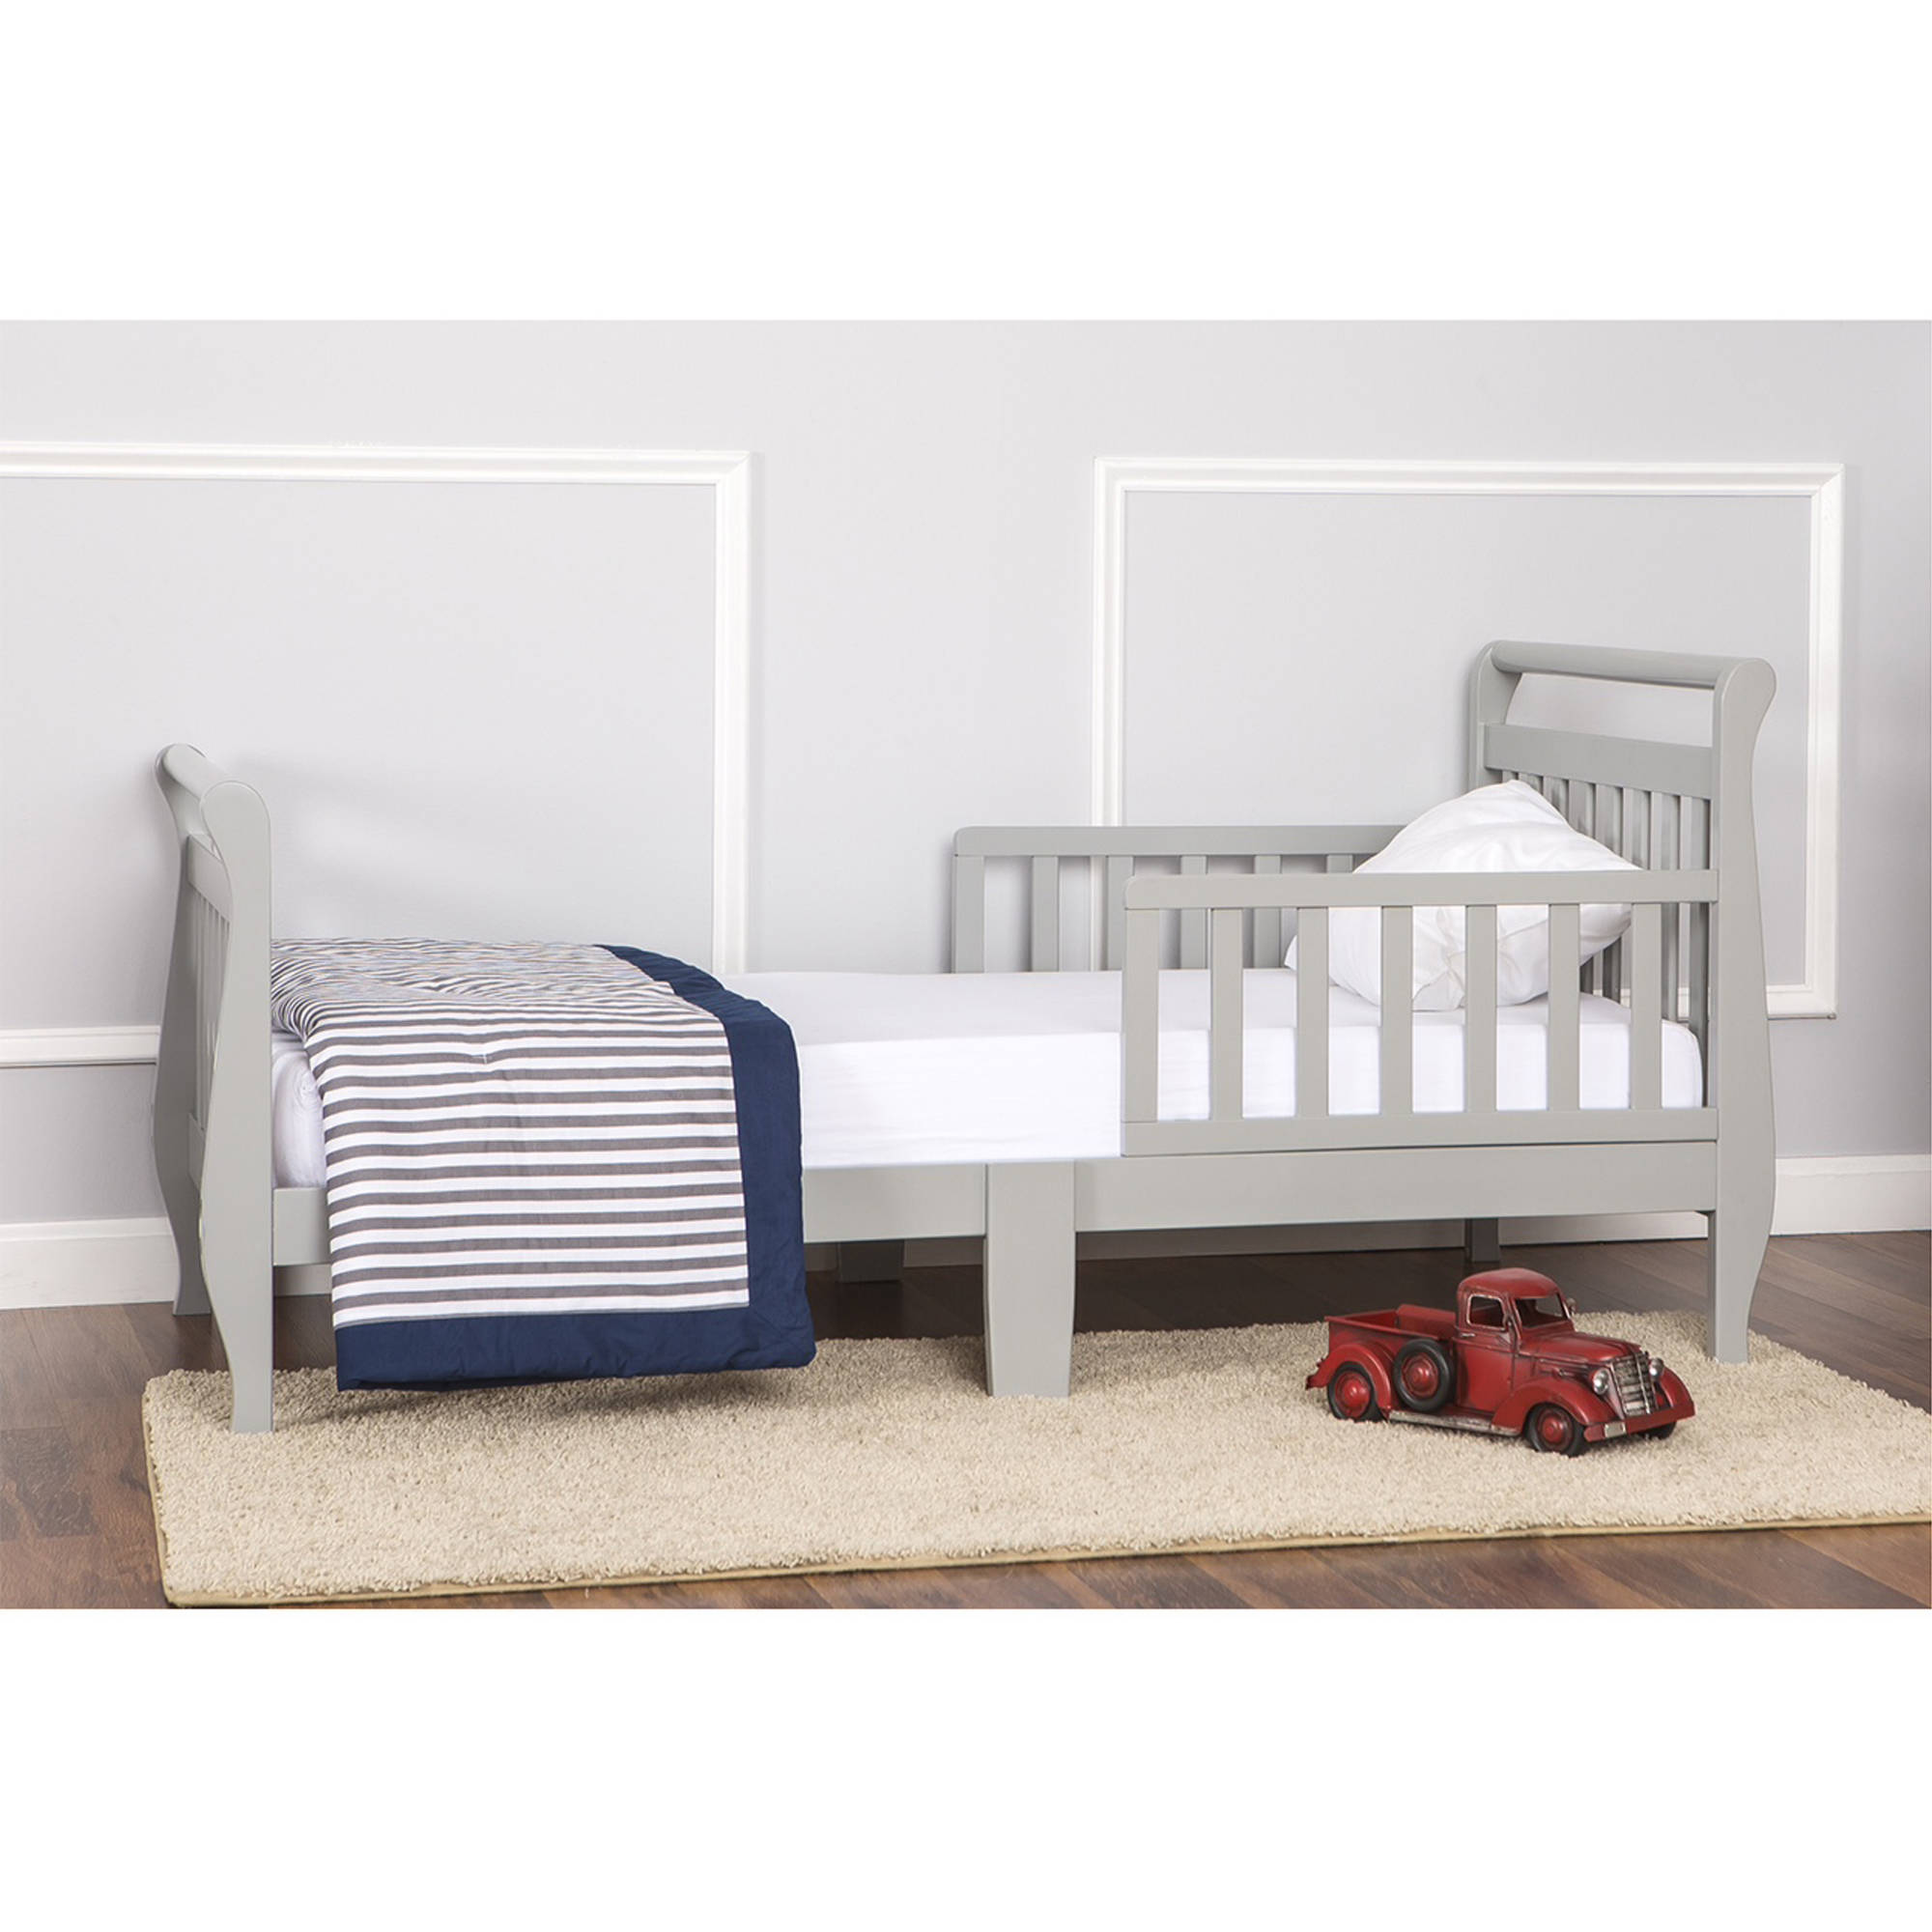 Dream On Me Sleigh Toddler Bed, Cool Grey - image 2 of 3